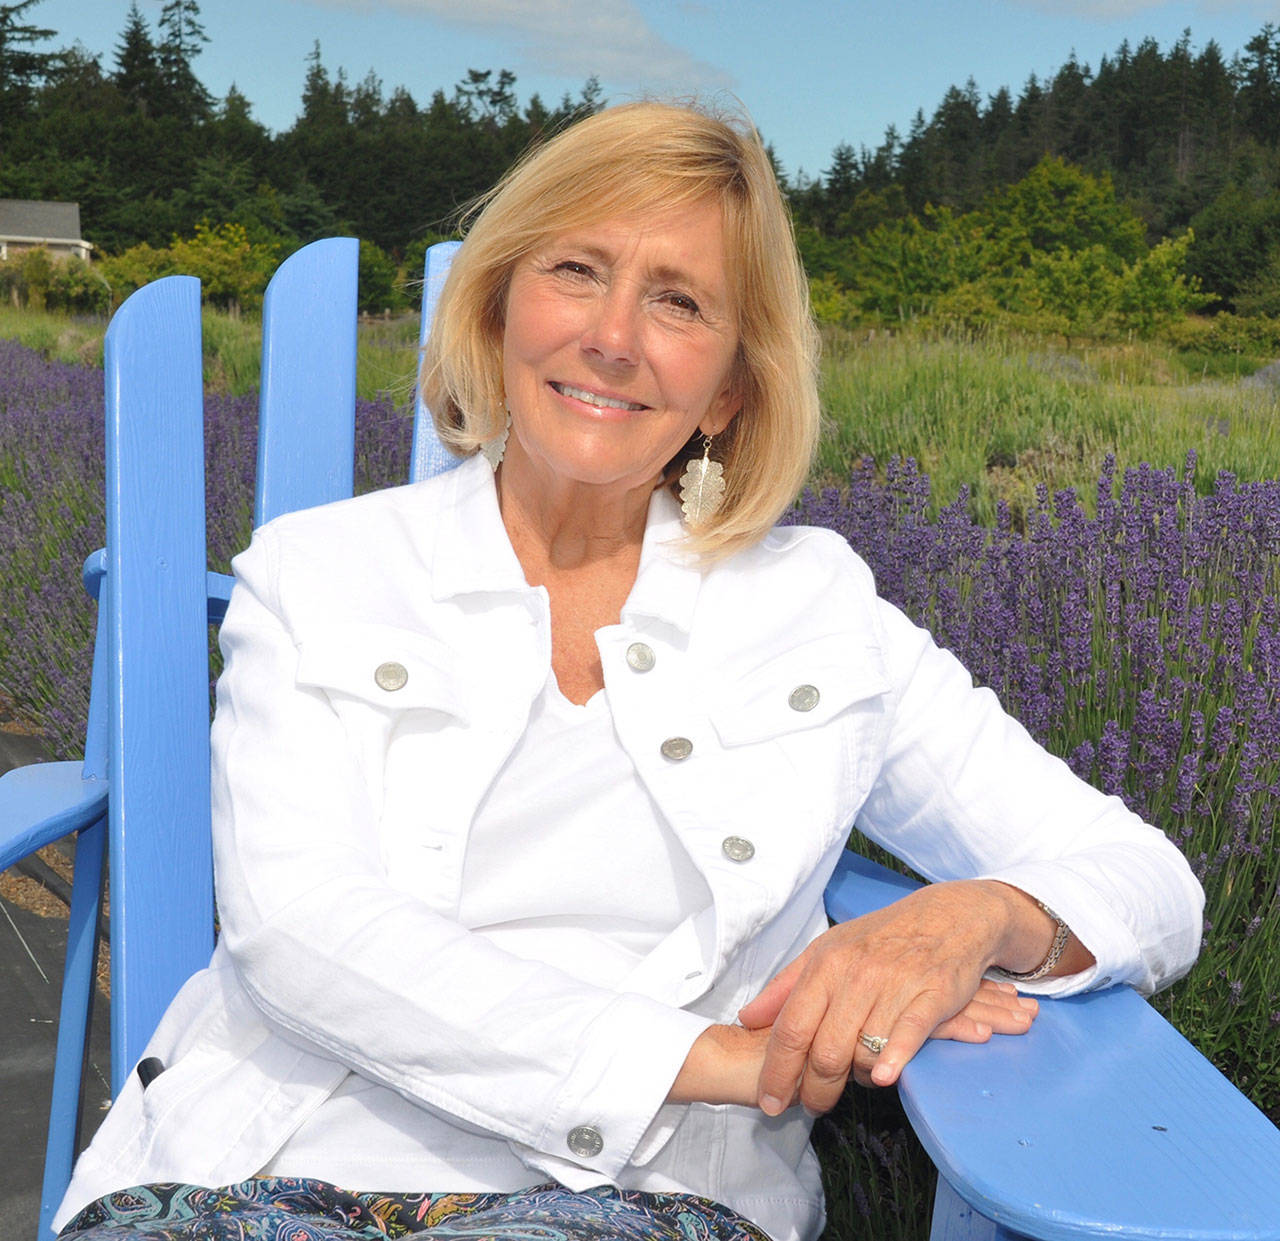 Michelle Gulka was recently added to the team of brokers at Windermere Real Estate/Sequim-East. Submitted photo